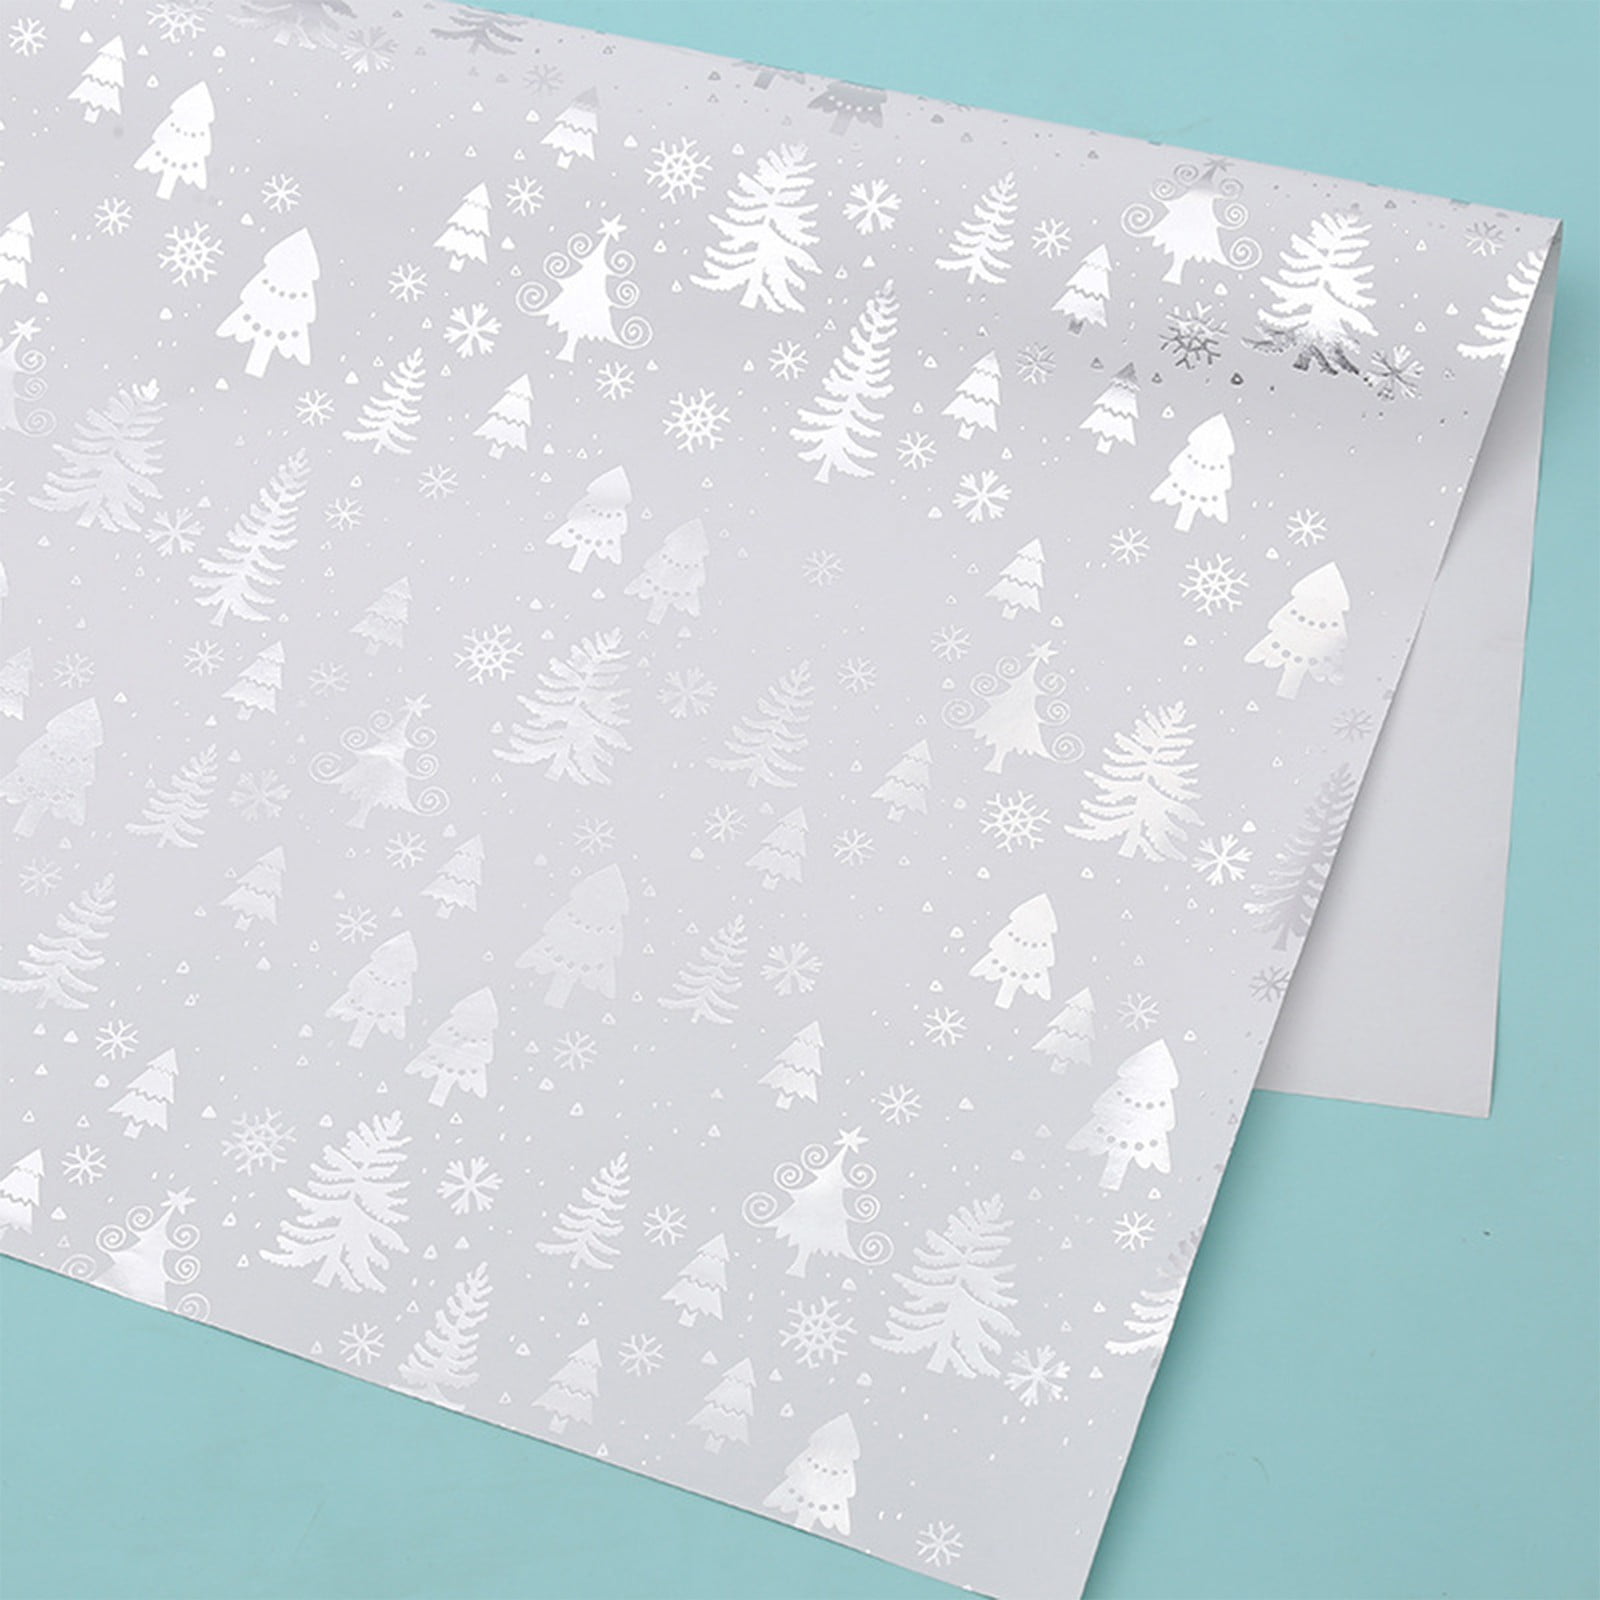 Pjtewawe Christmas Decorations Gift Wrapping Paper 1PC DIY Christmas  Wrapping Paper Holiday Gifts Wrapping Truck Plaid Snowflake Green Tree  Christmas Design Snowflake Wrapping Paper 